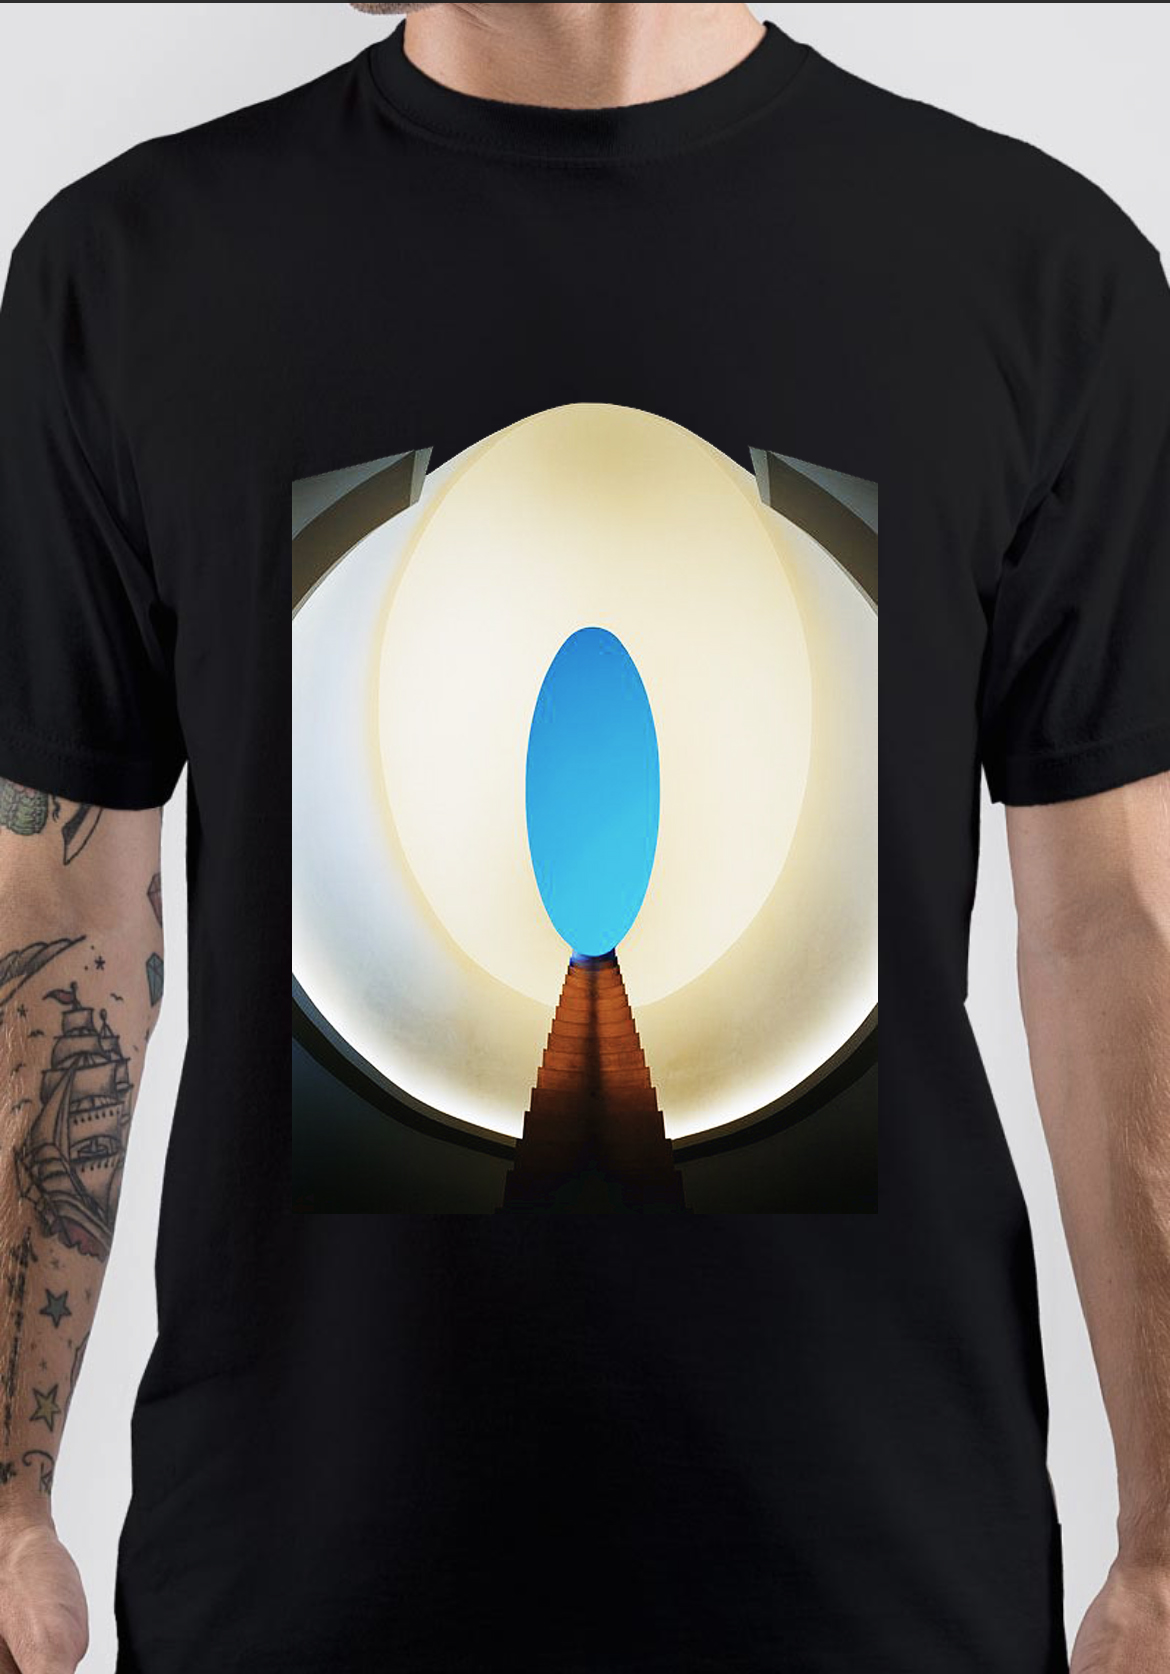 James Turrell T-Shirt And Merchandise